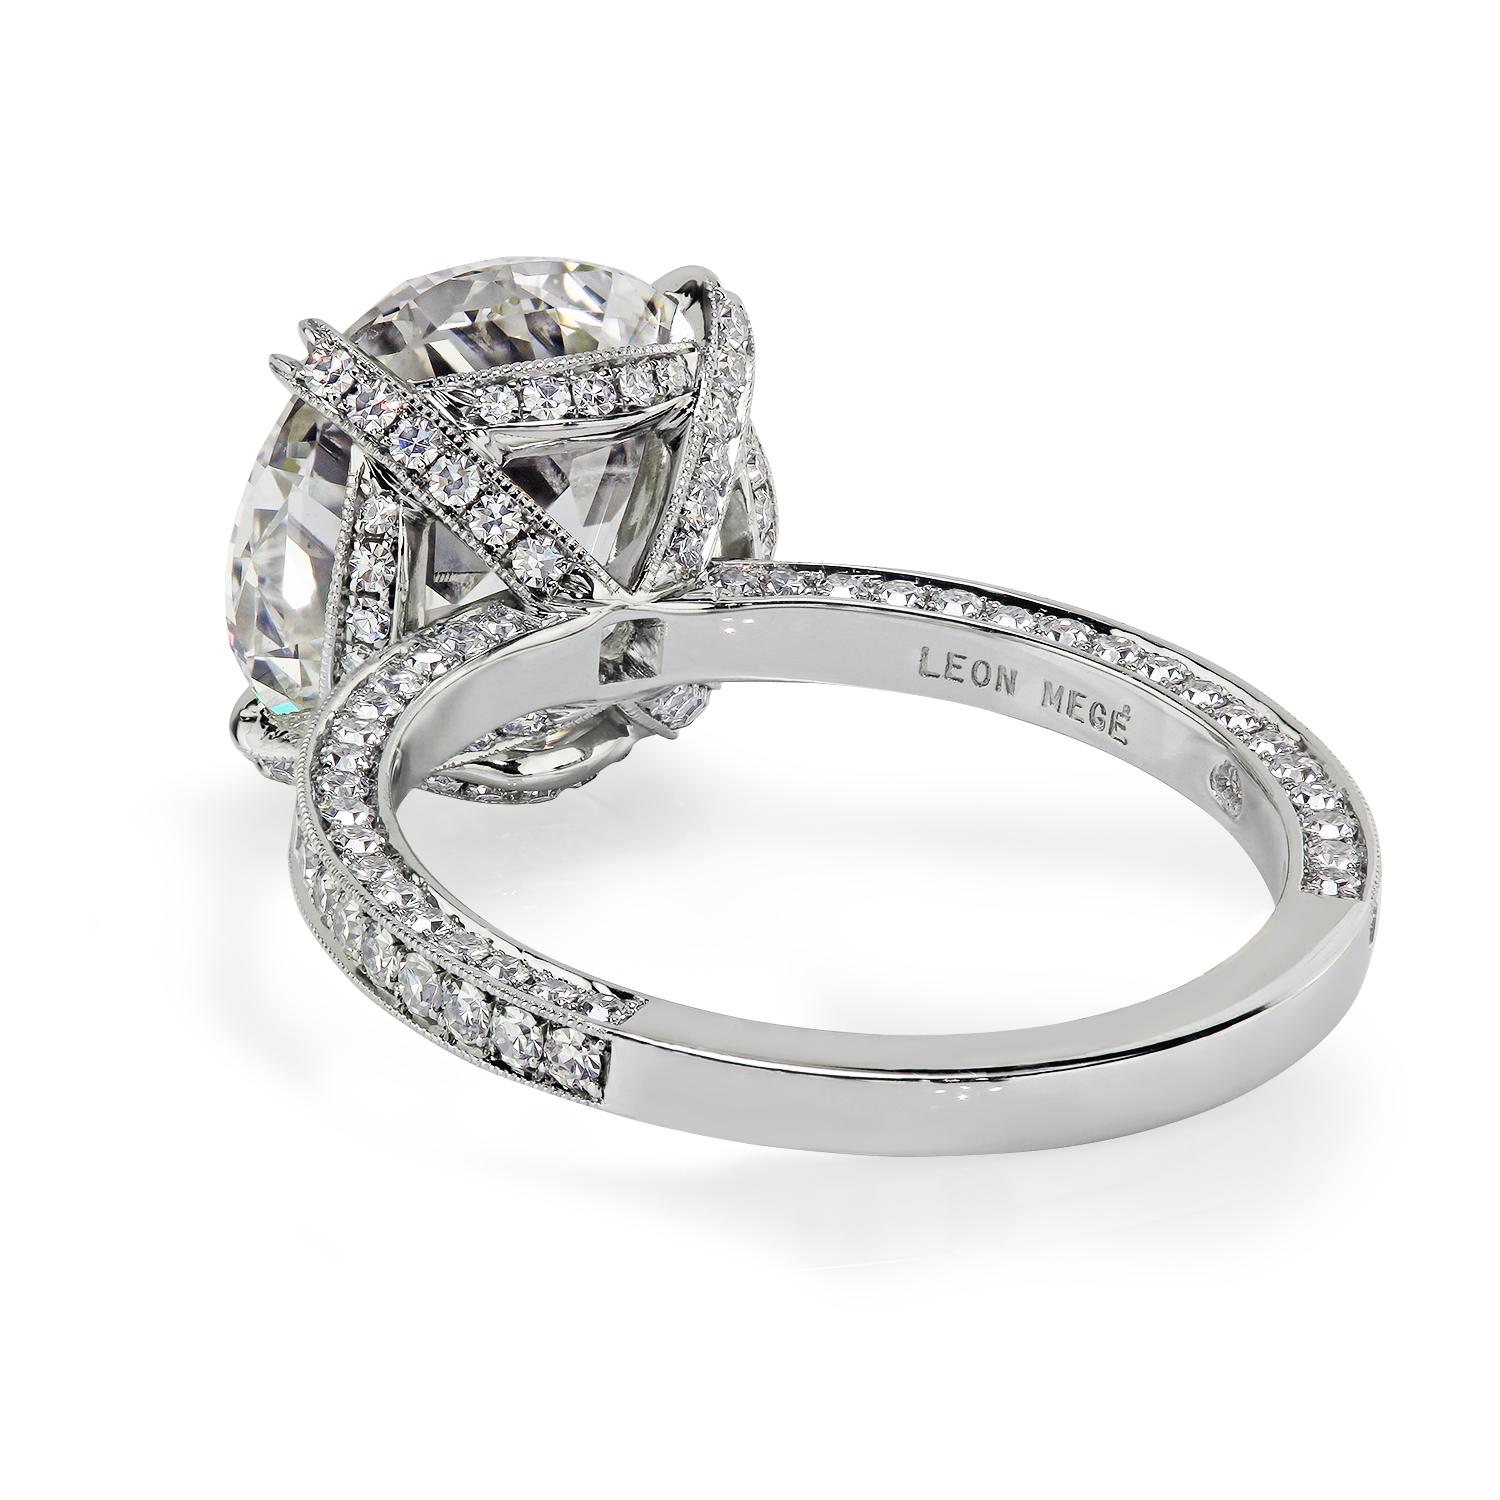 Cosmo™ solitaire featuring a 3.70-Carat JVS1 old European cut diamond accented by bright-cut pave.
Hand-forged platinum
Single-cut diamonds
Millgrain details

The price includes of-GIA certified diamond. We can send a copy of the GIA certificate to